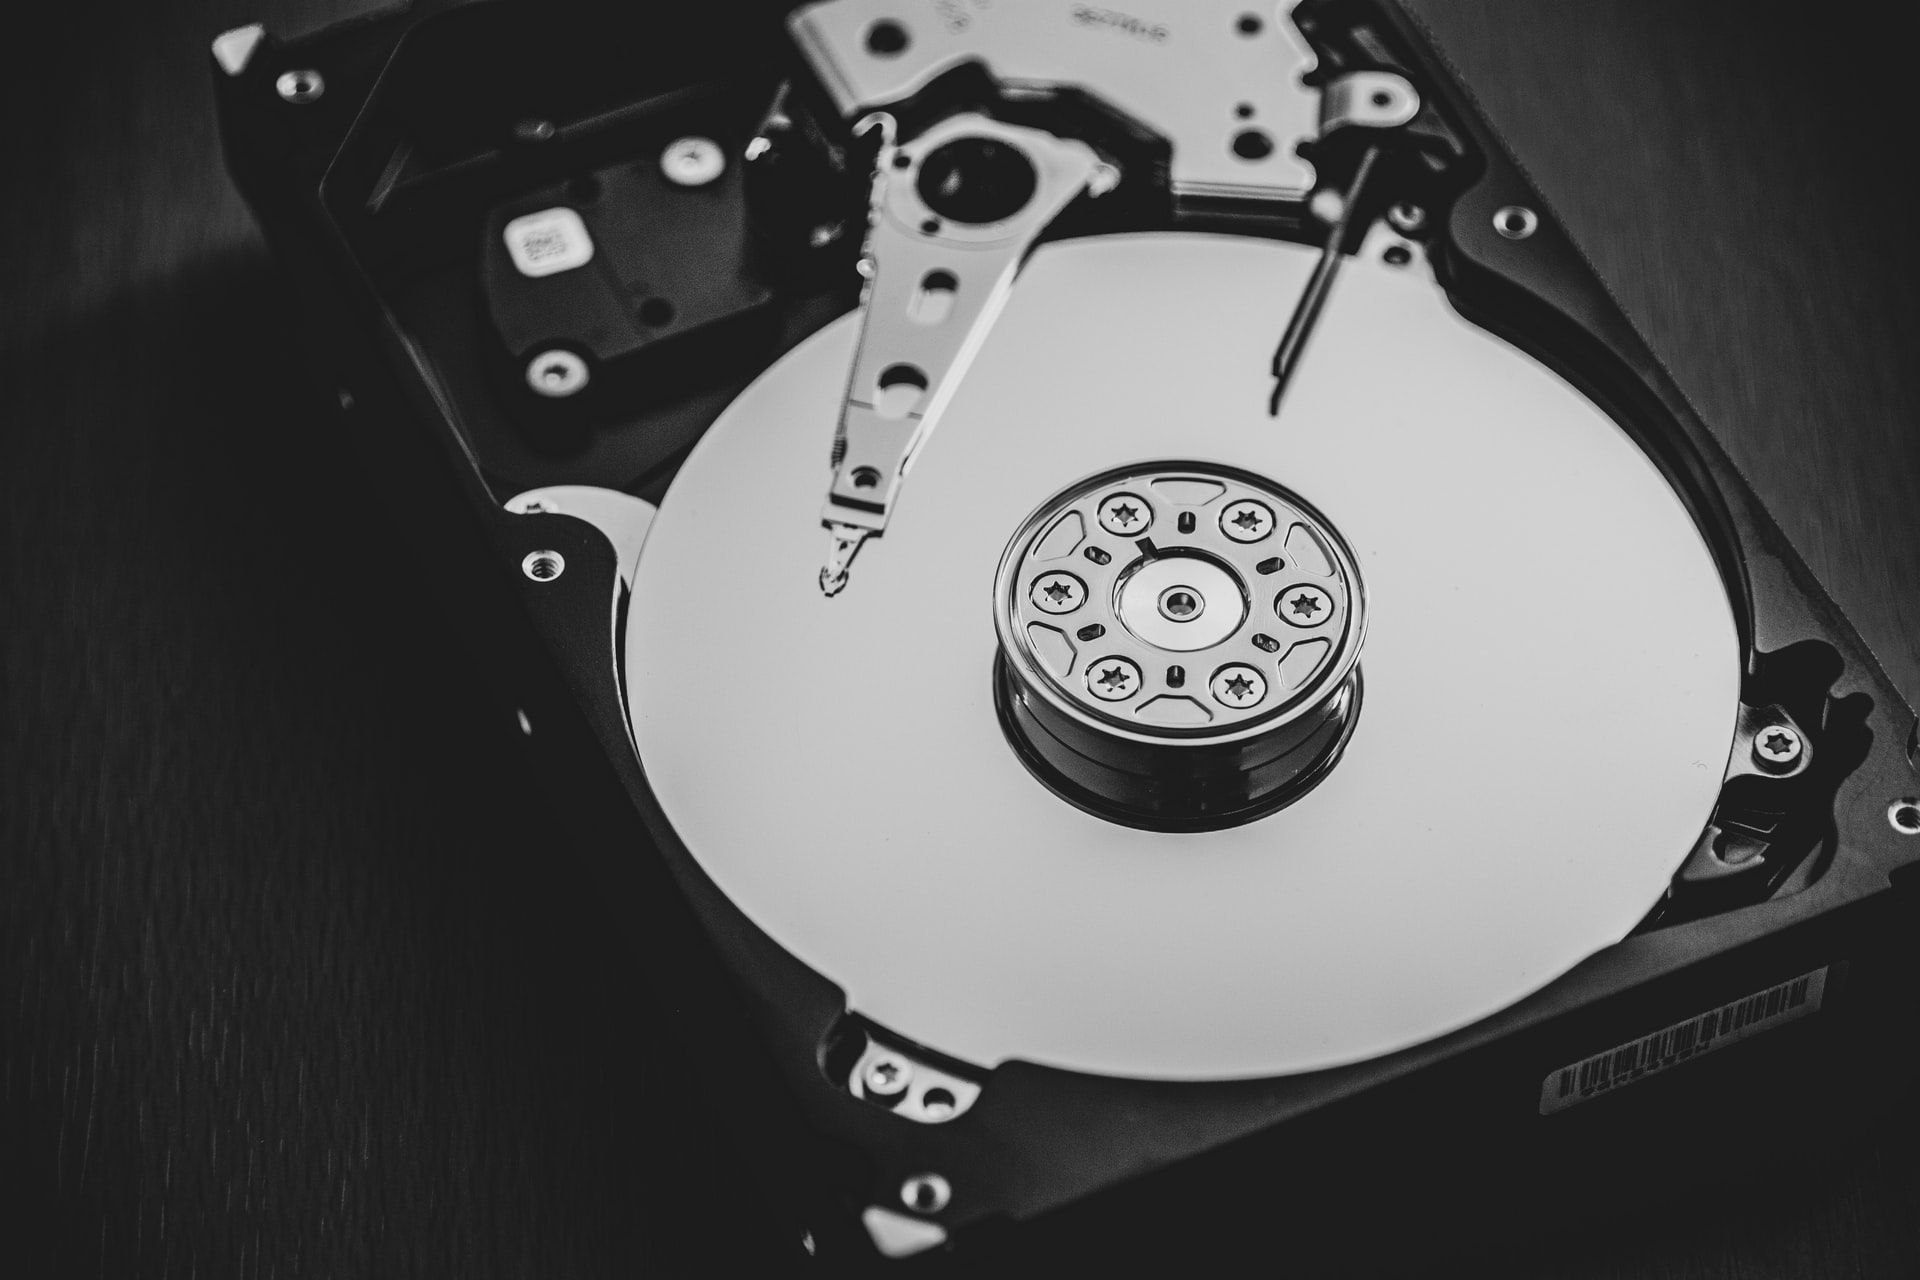 what is the hard disk drive